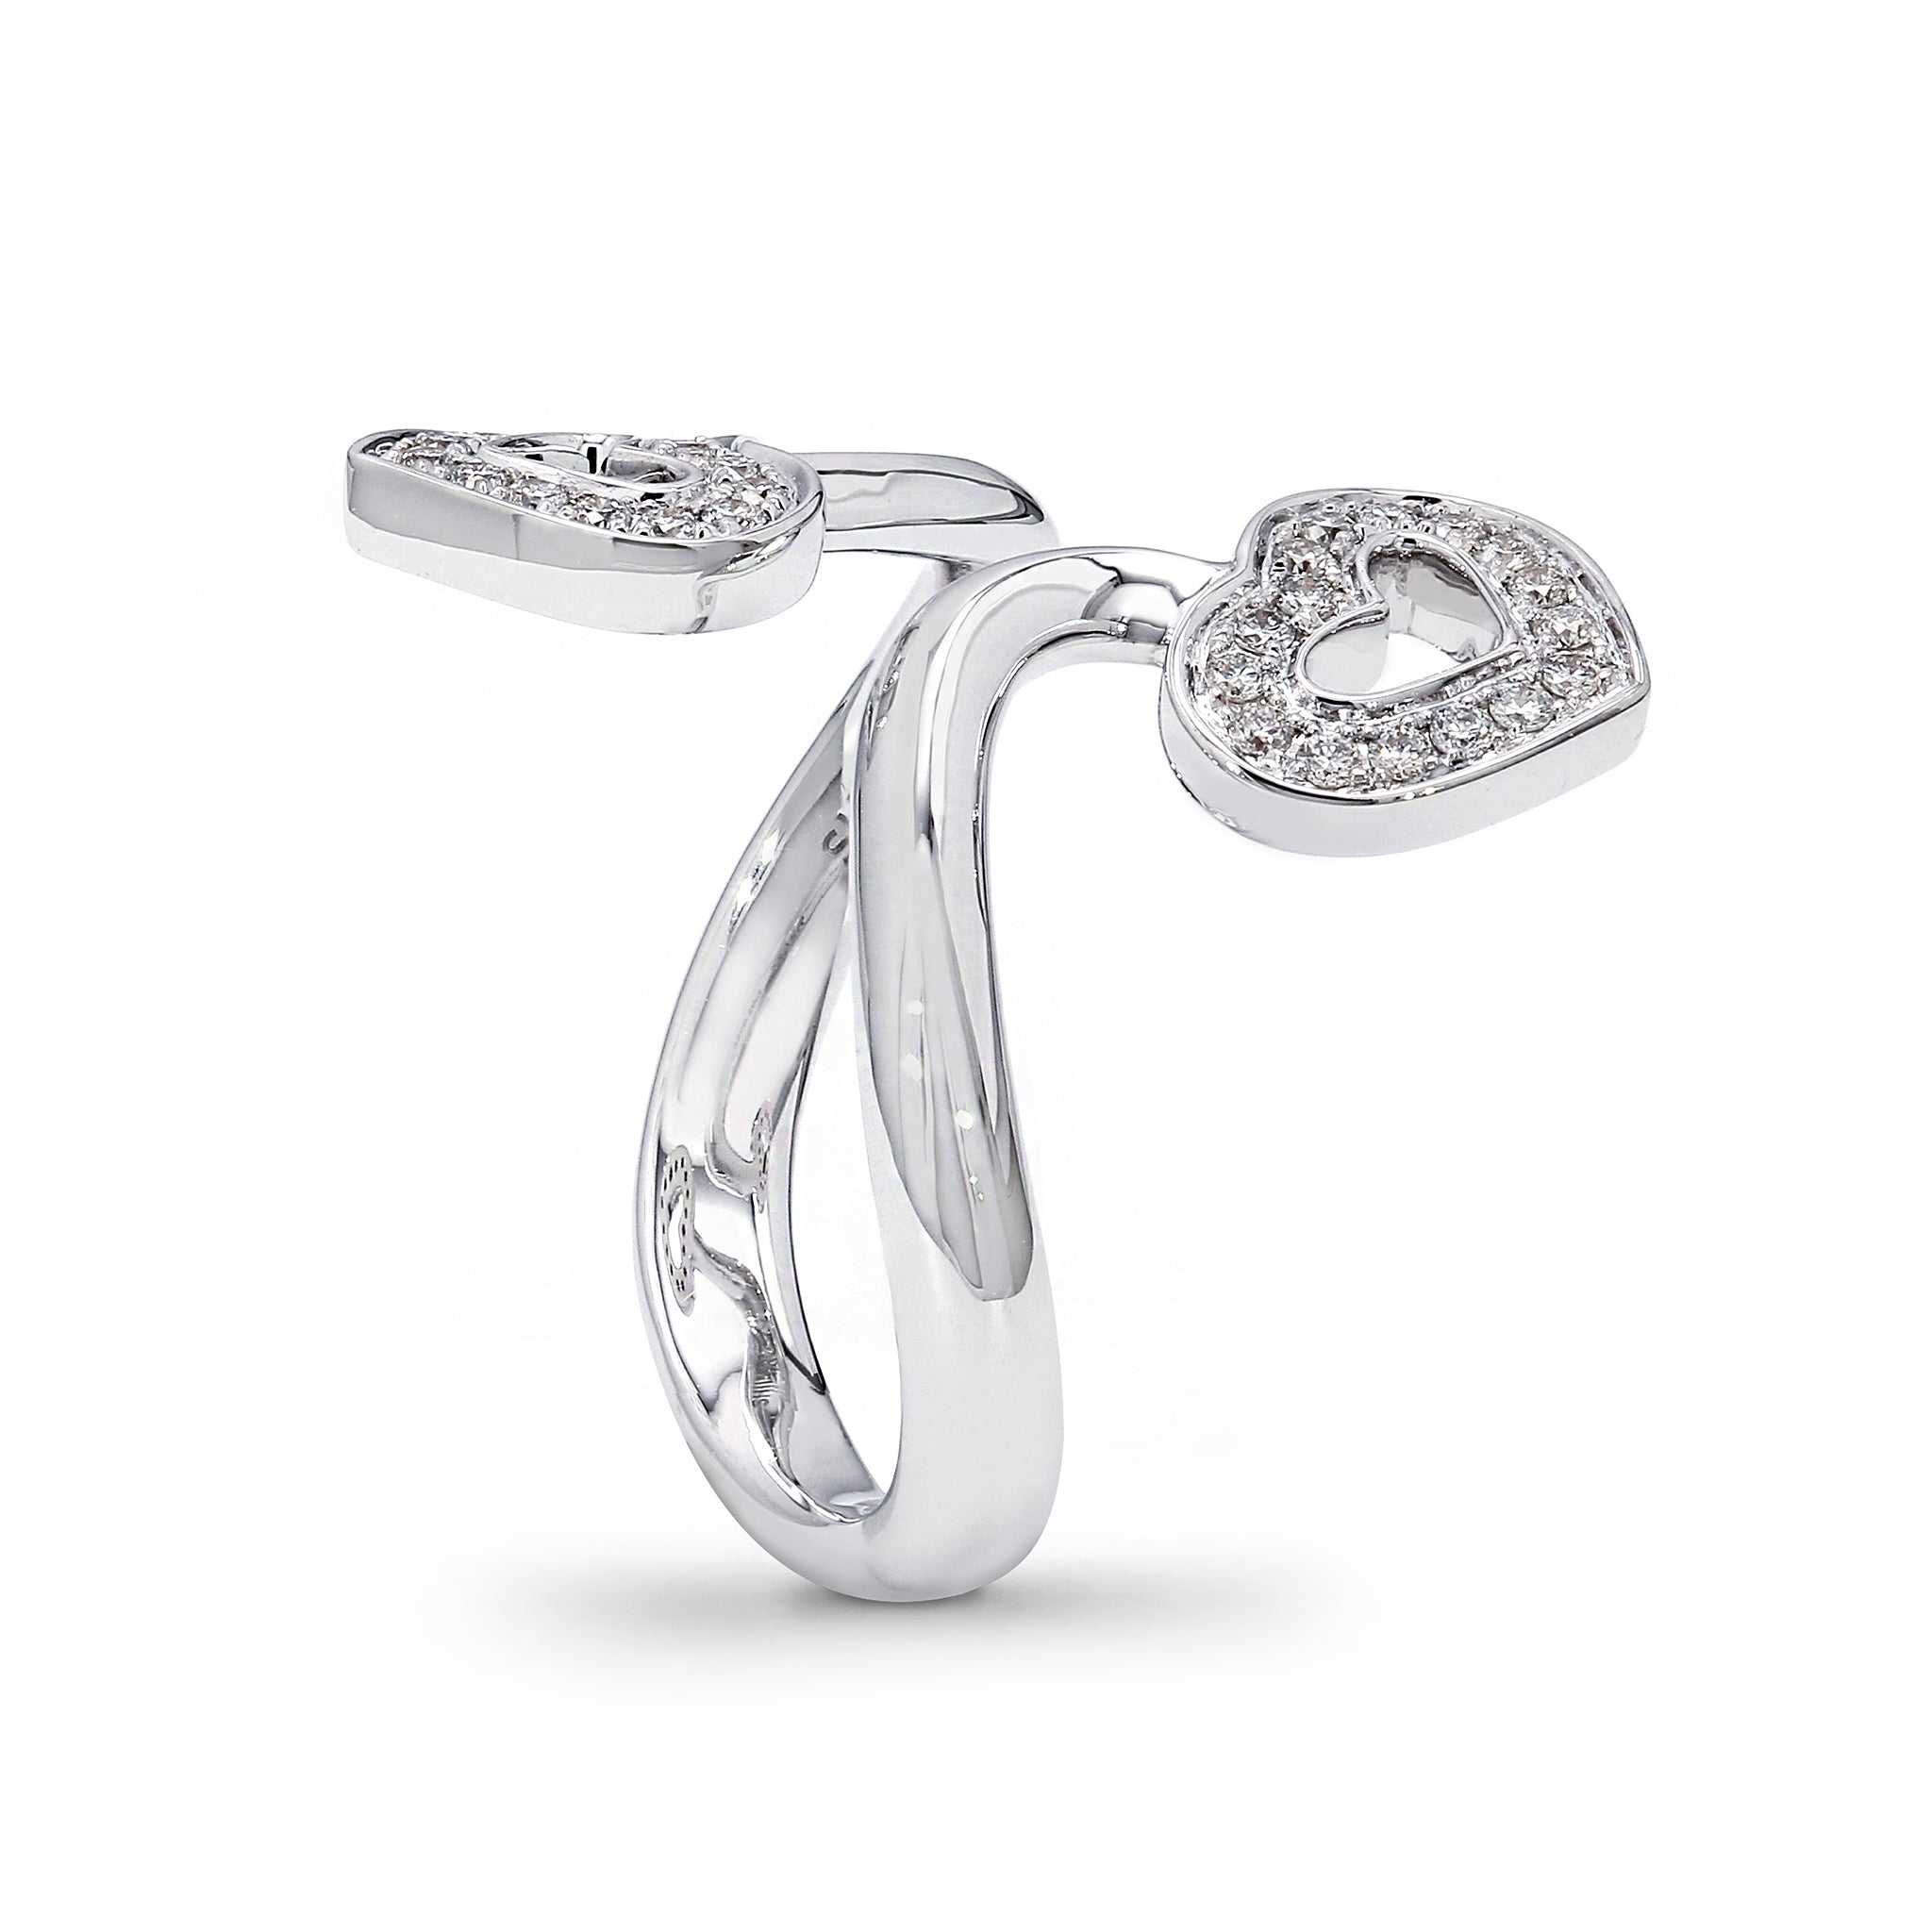 Shimansky - Two Hearts Twist Diamond Pave Ring 0.20ct crafted in 18K White Gold